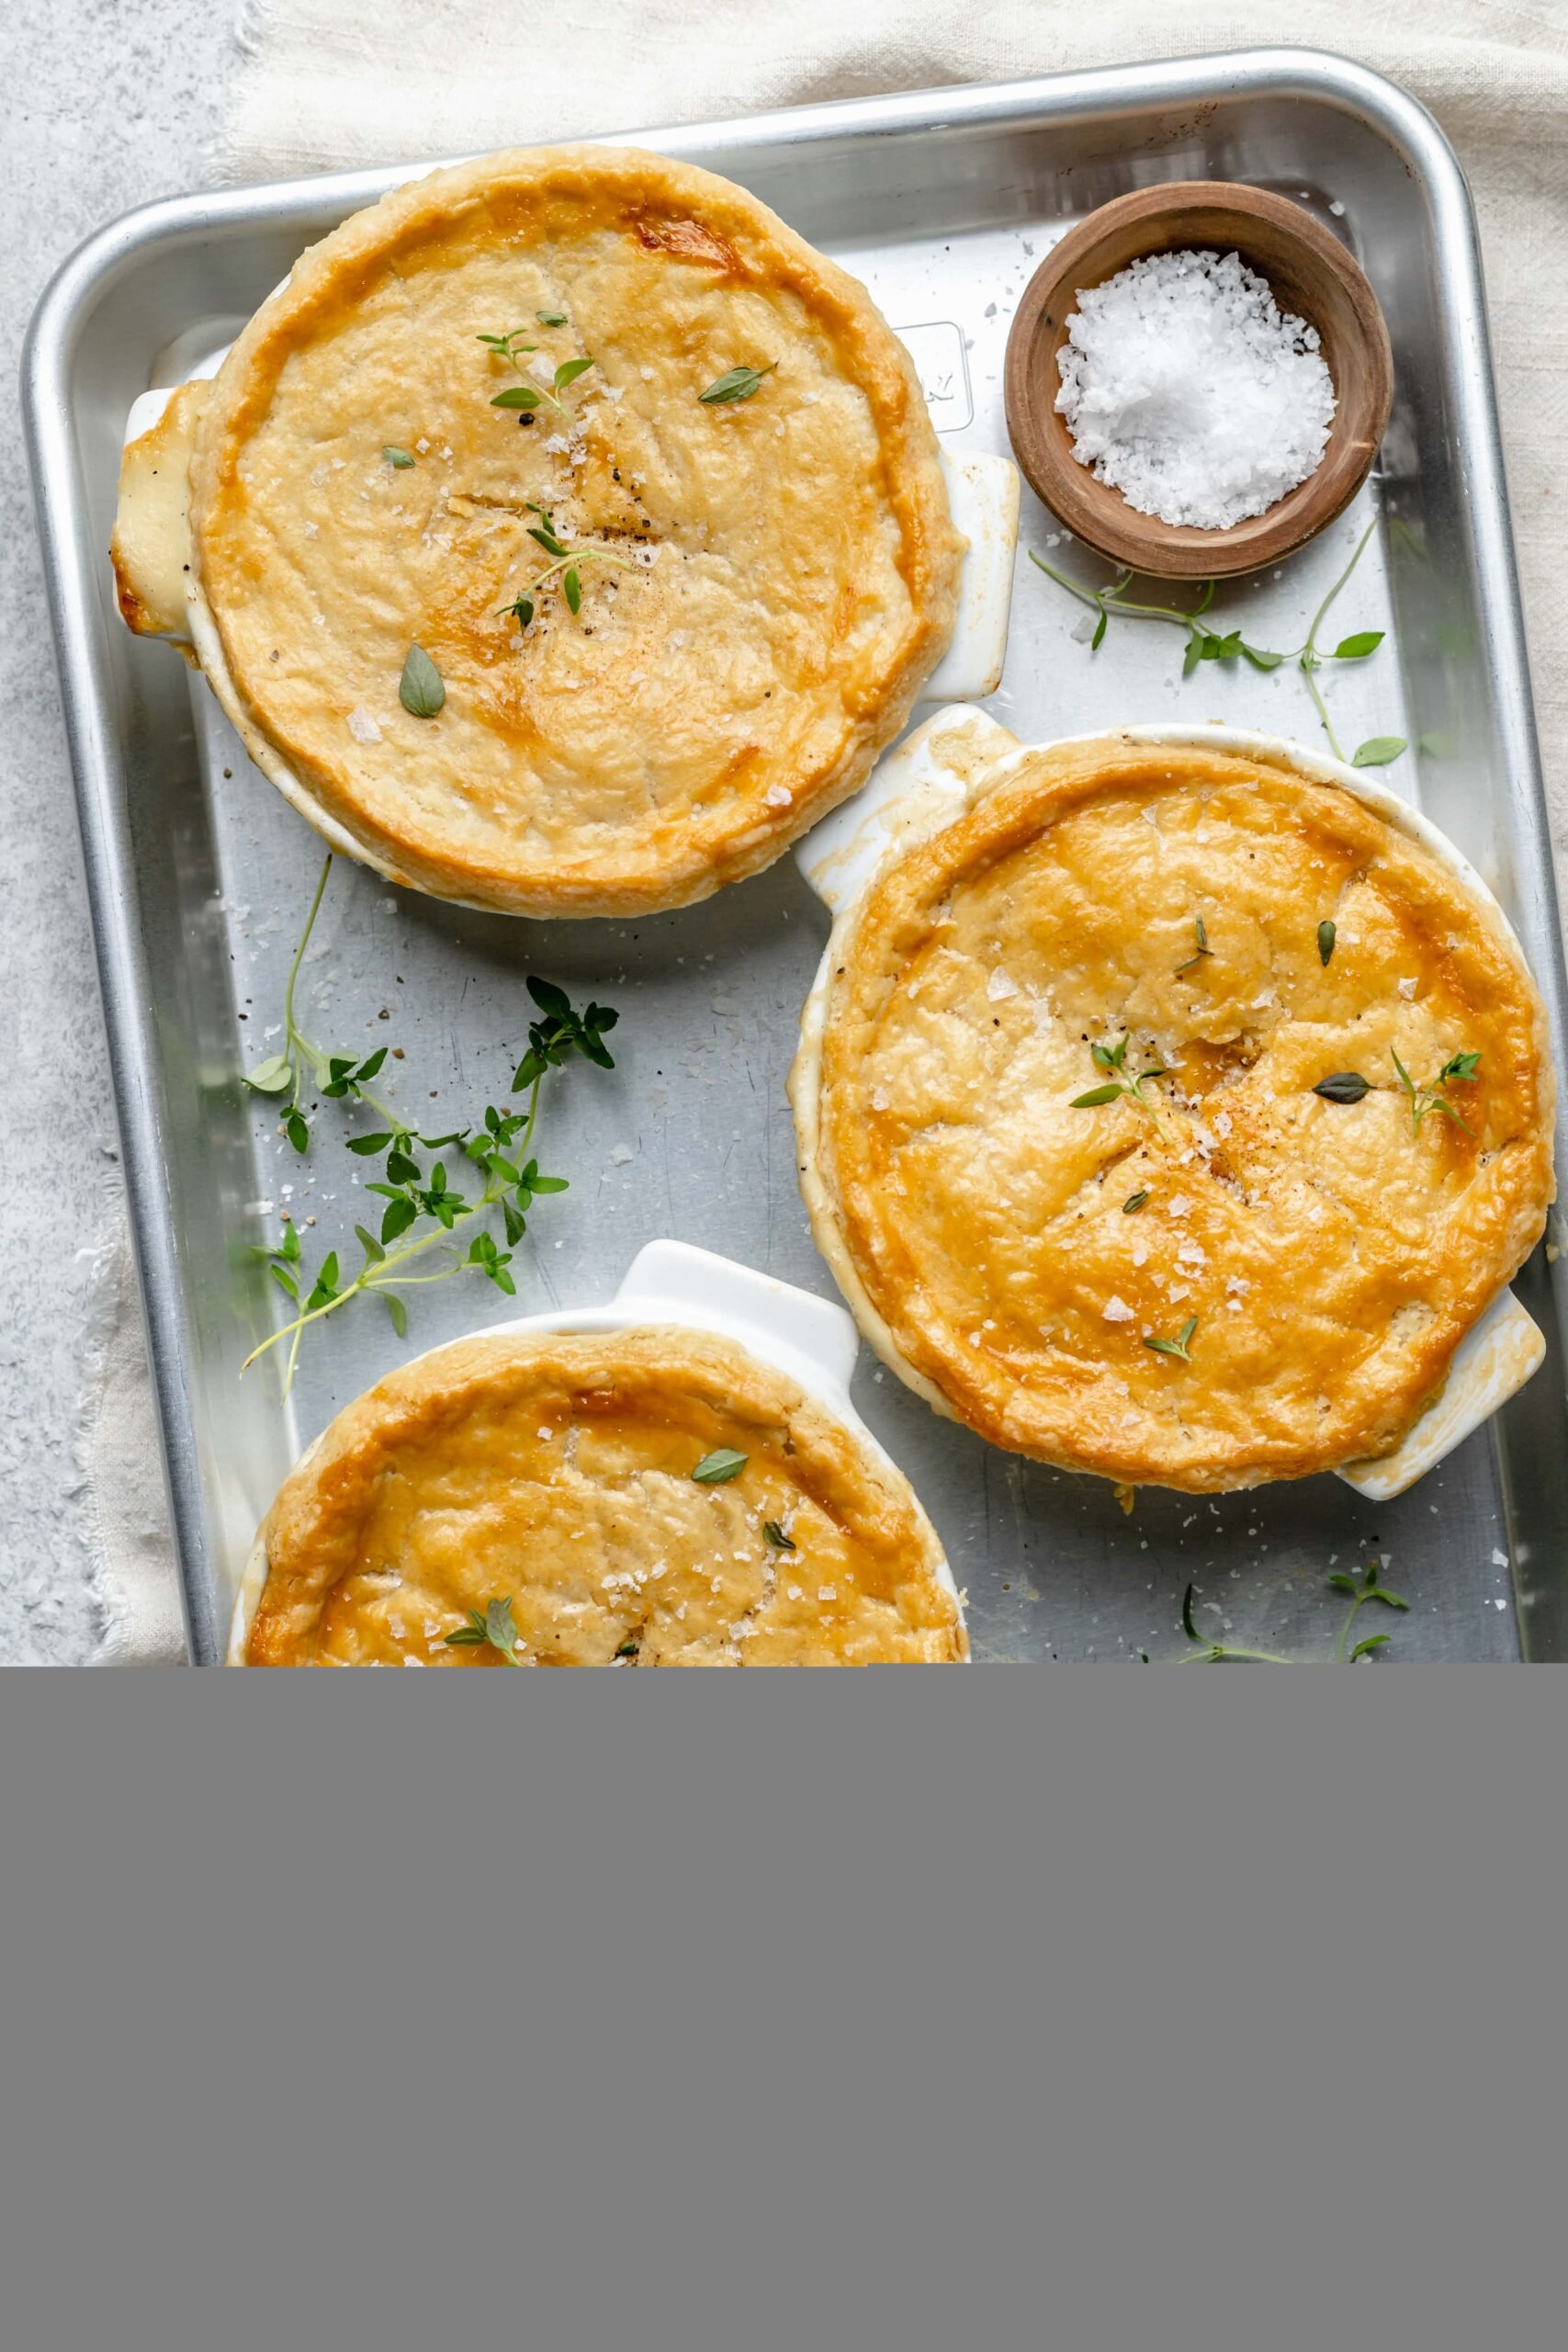 https://allthehealthythings.com/wp-content/uploads/2021/11/Homemade-Chicken-Pot-Pie-5-scaled.jpg